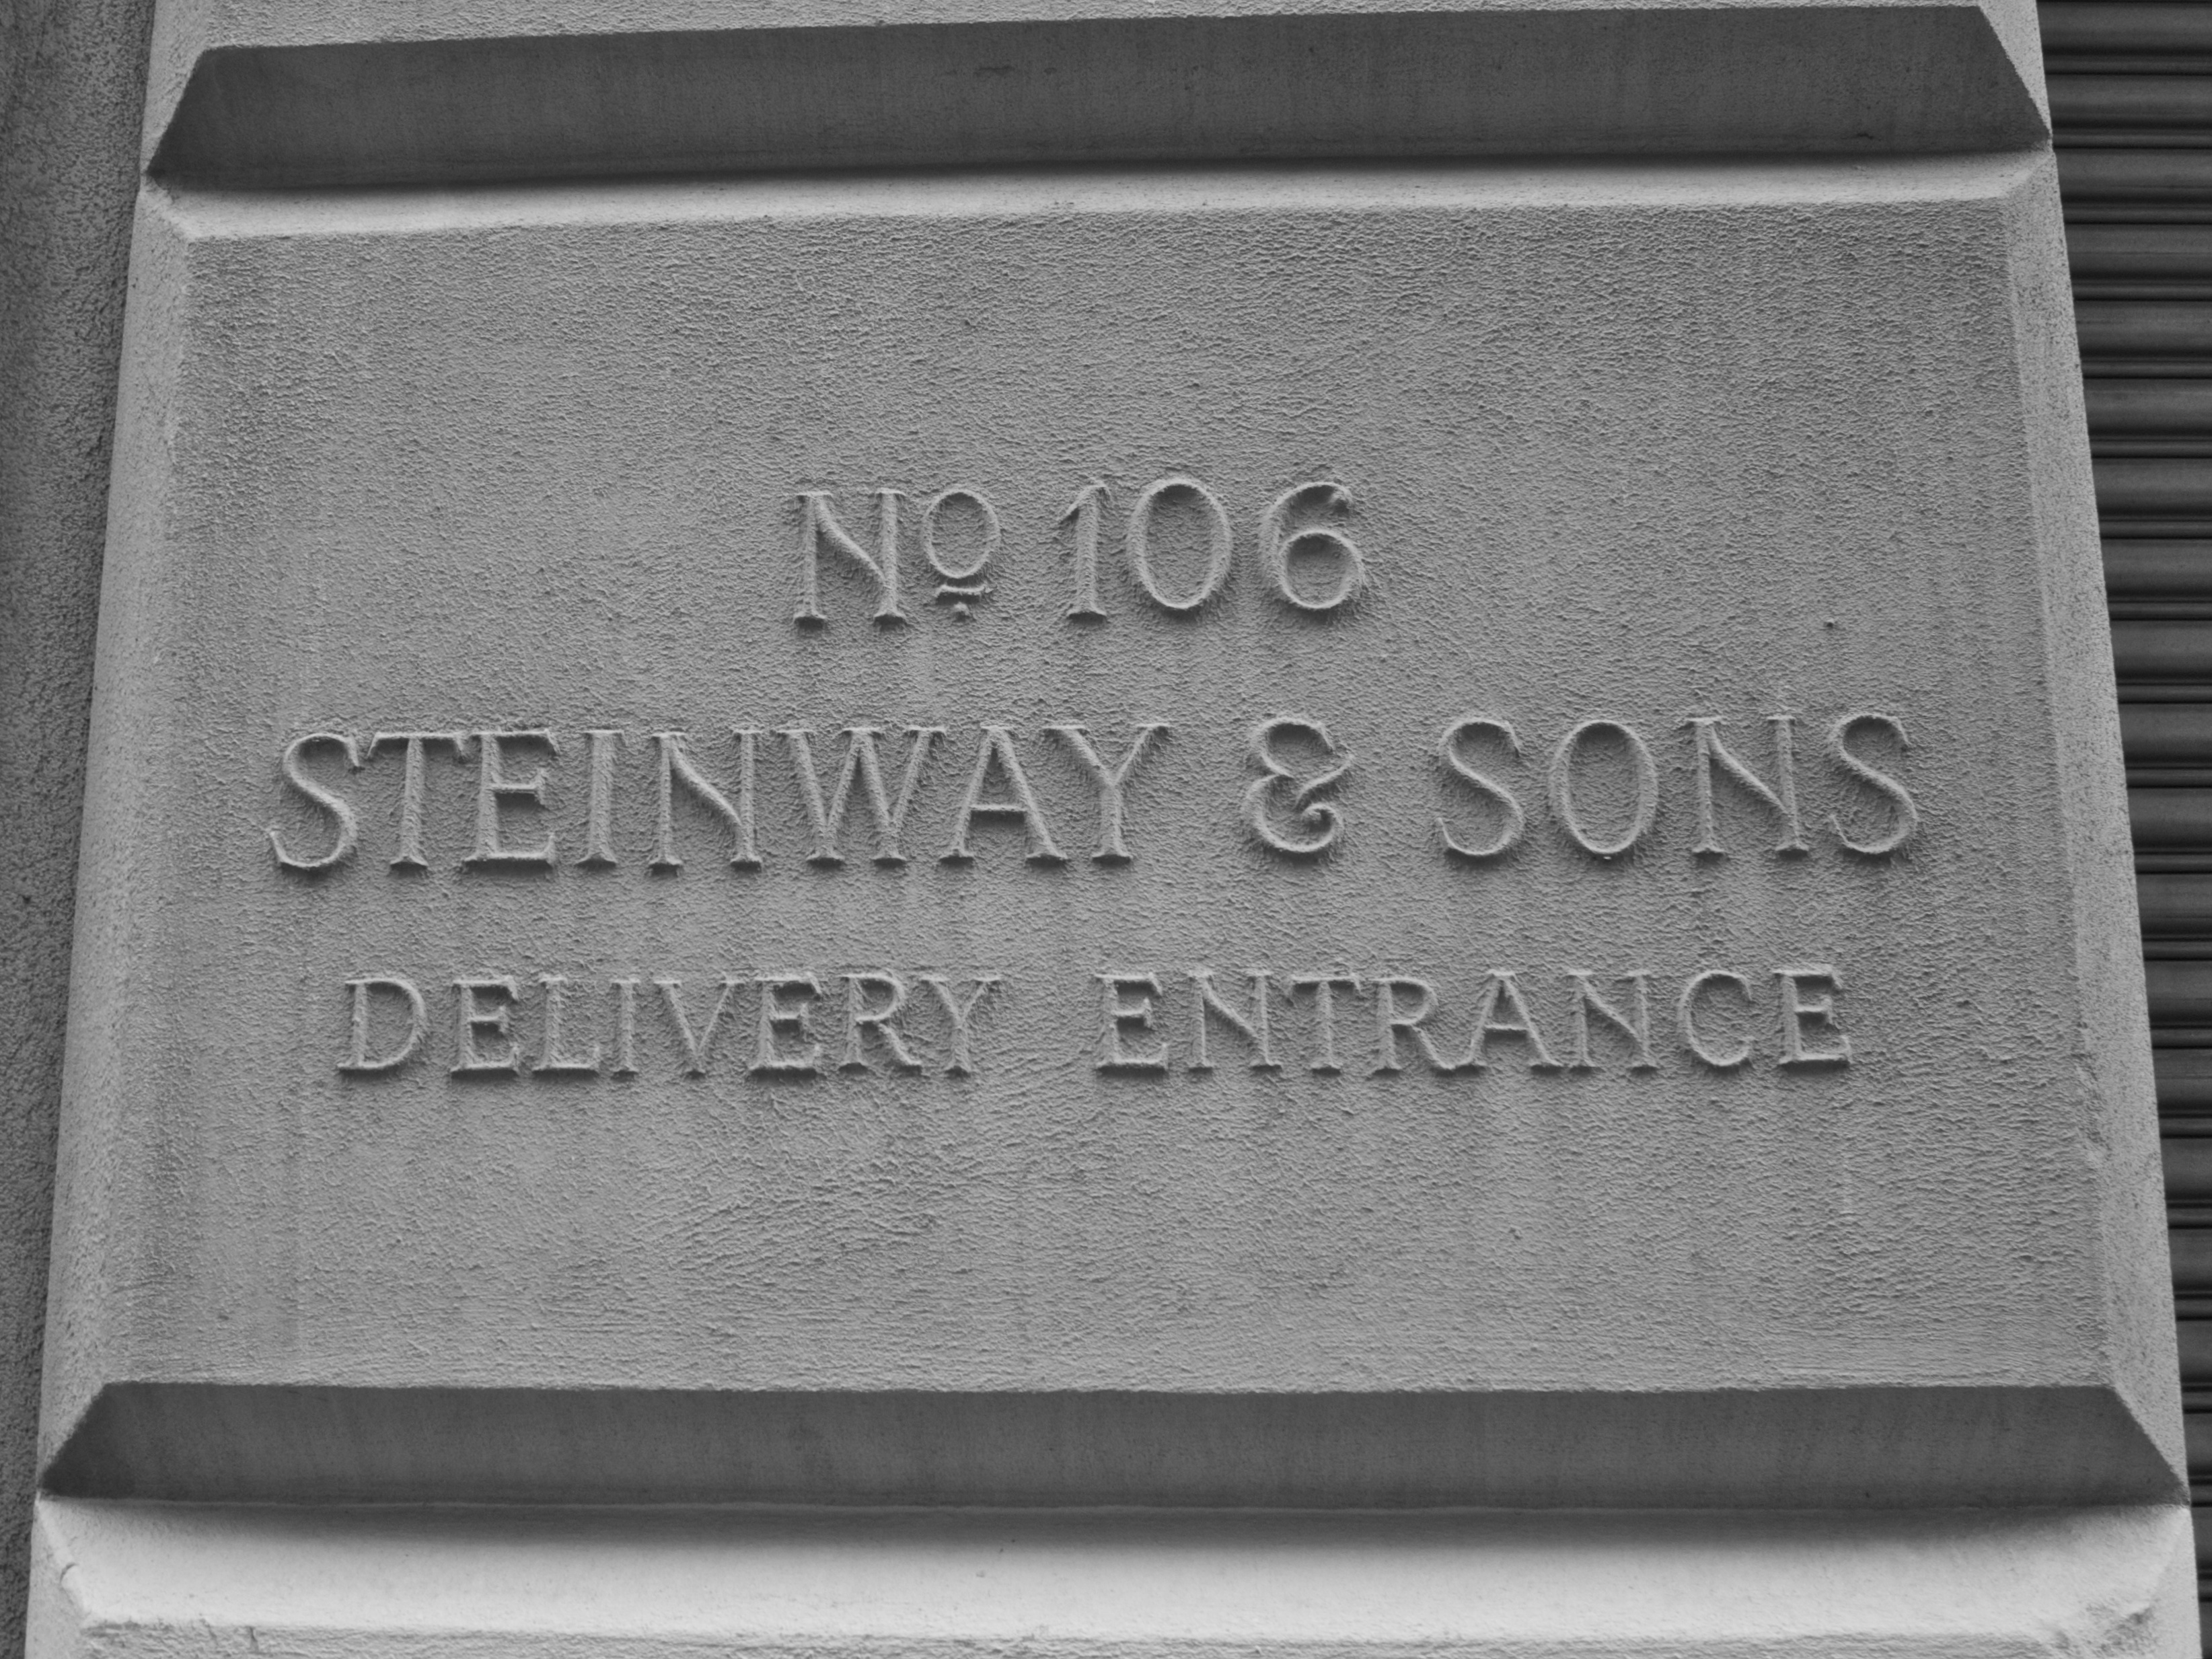 Day 228 - Steinway & Sons